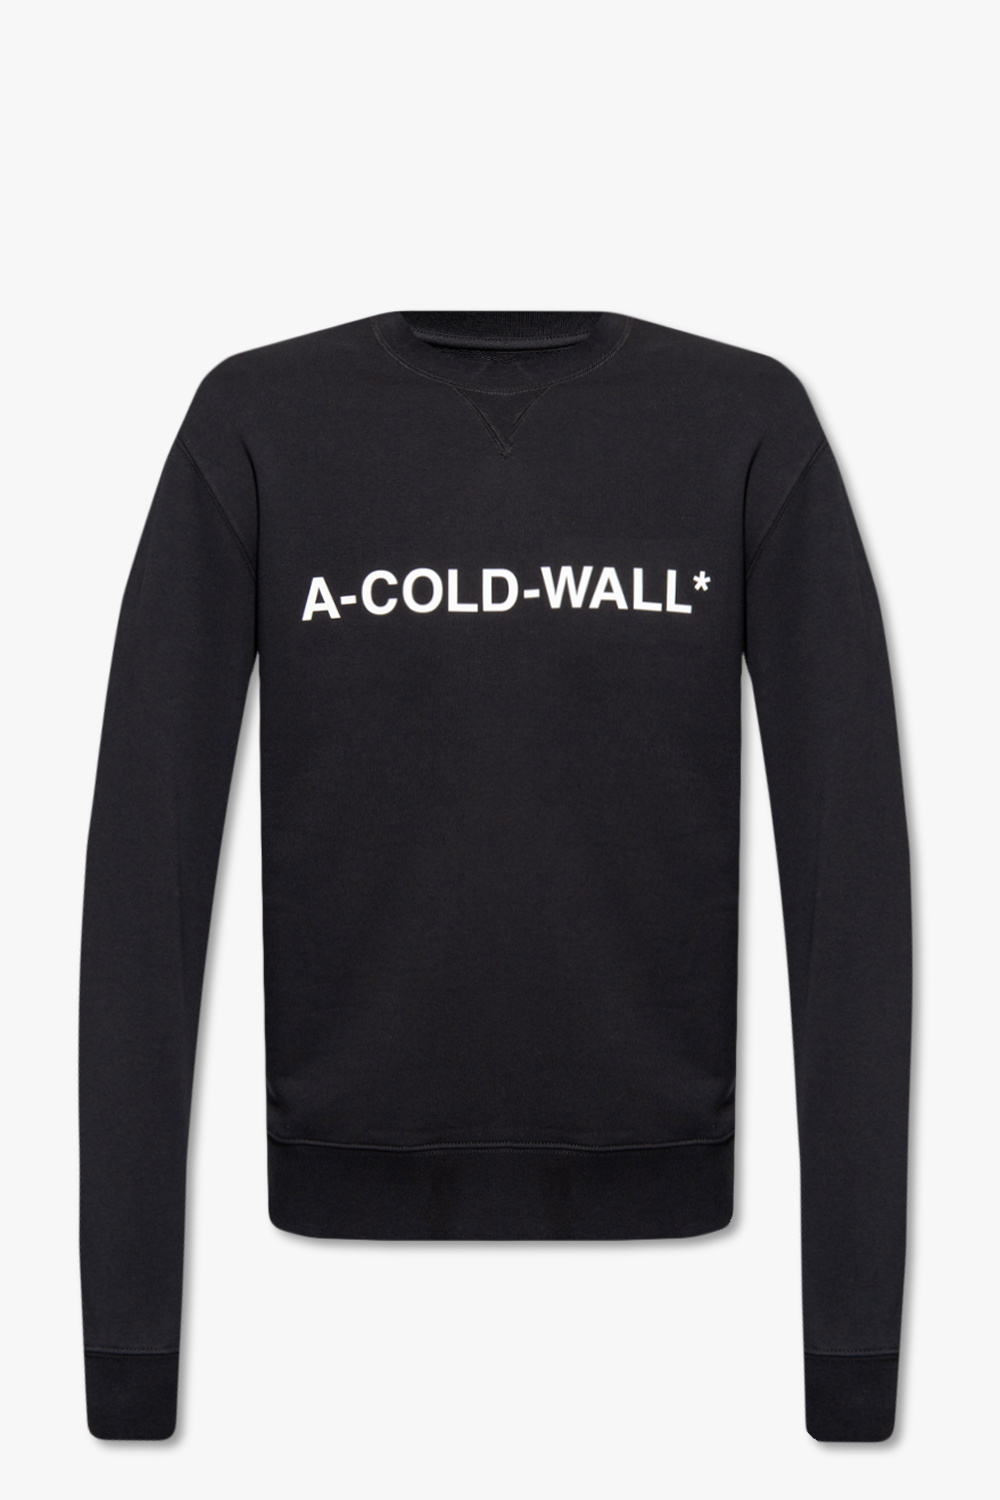 A-COLD-WALL* Lisa Yang Cashmere Taylor Sweater in Cream